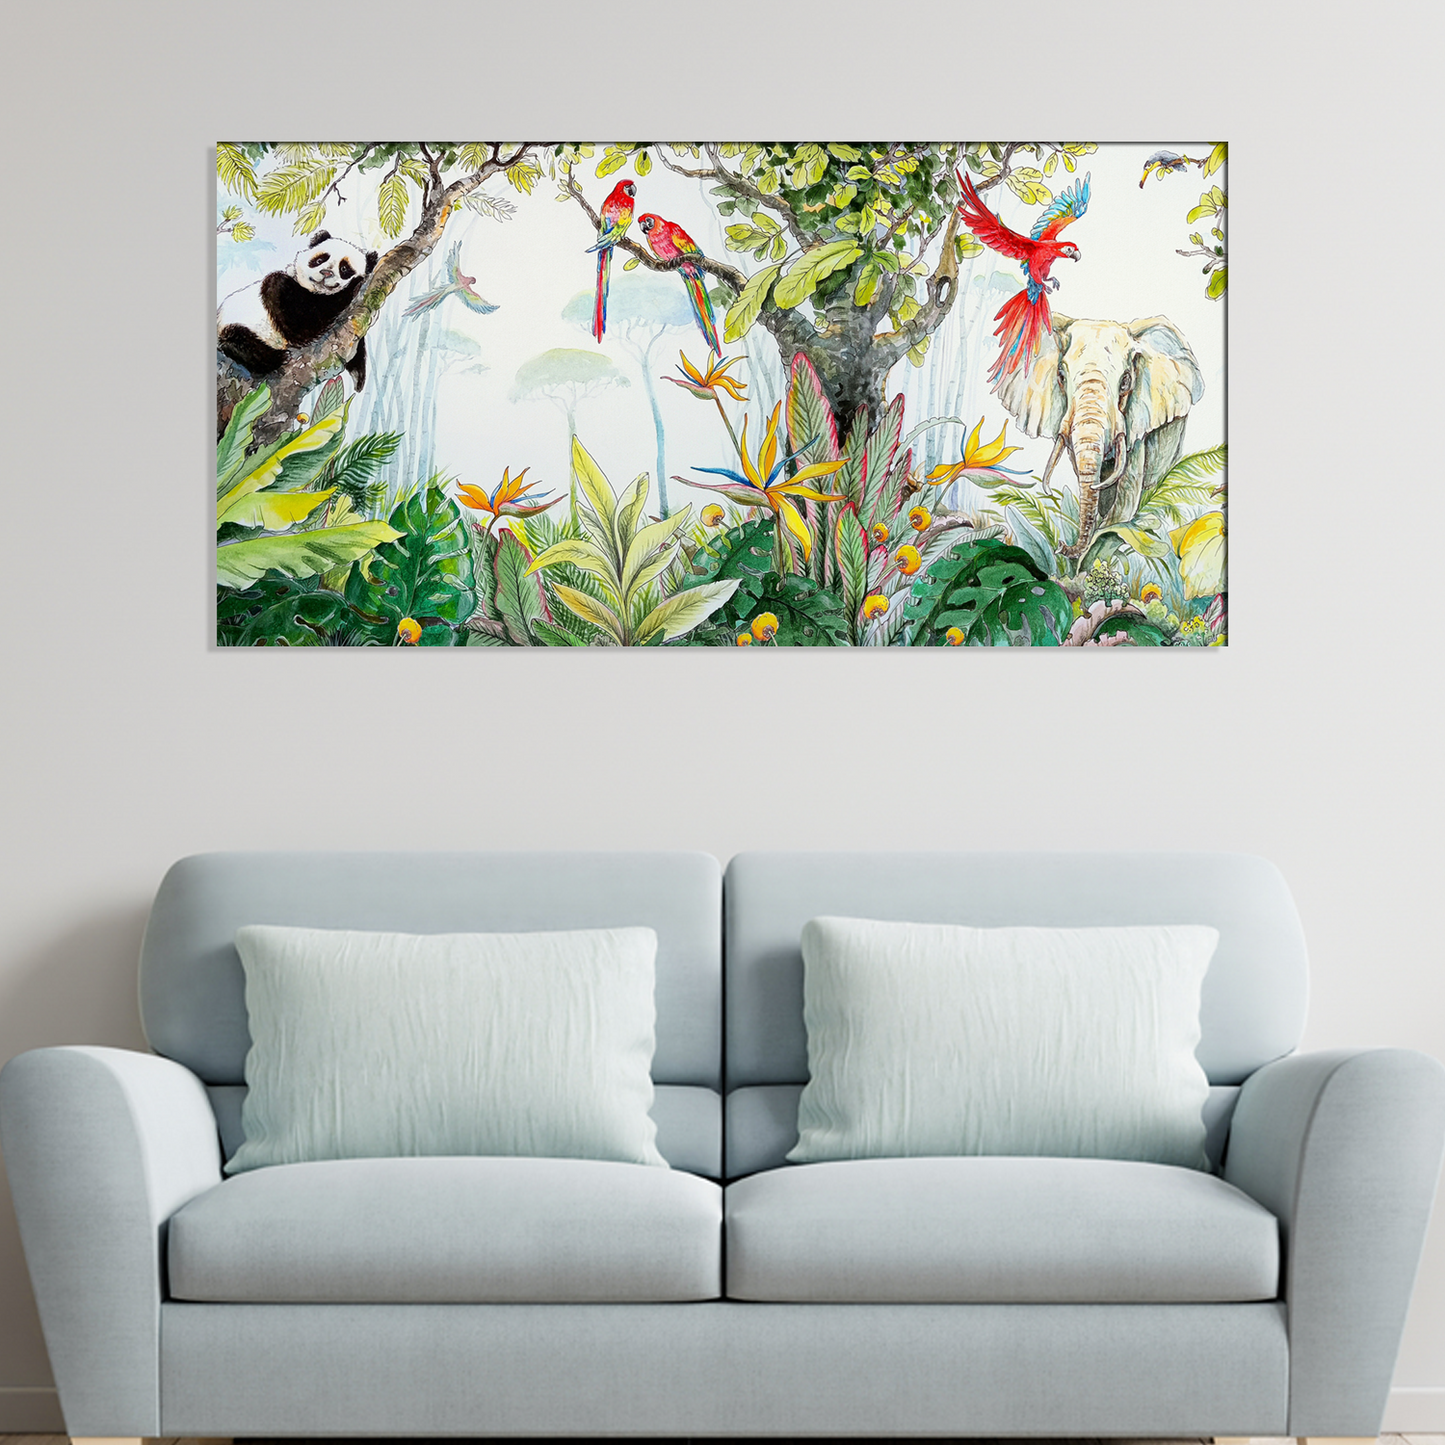 Panda and Birds in the forest Canvas Wall Painting